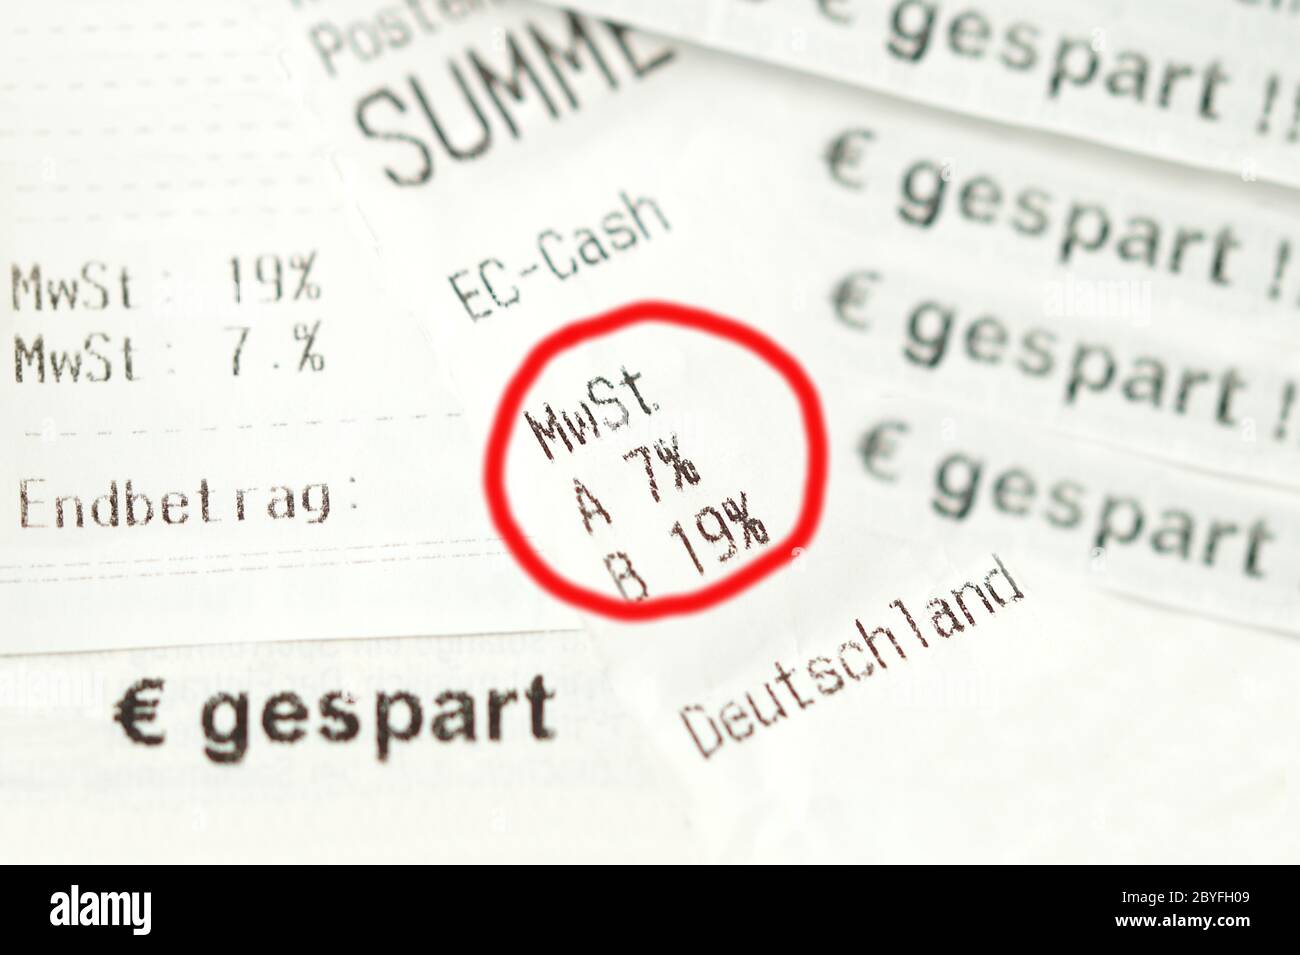 german cash sales receipt circled in red. Invoice with vat tax value. VAT rate 19 percent to 16% and 7 percent to 5%. financial / invoice -deutschland Stock Photo